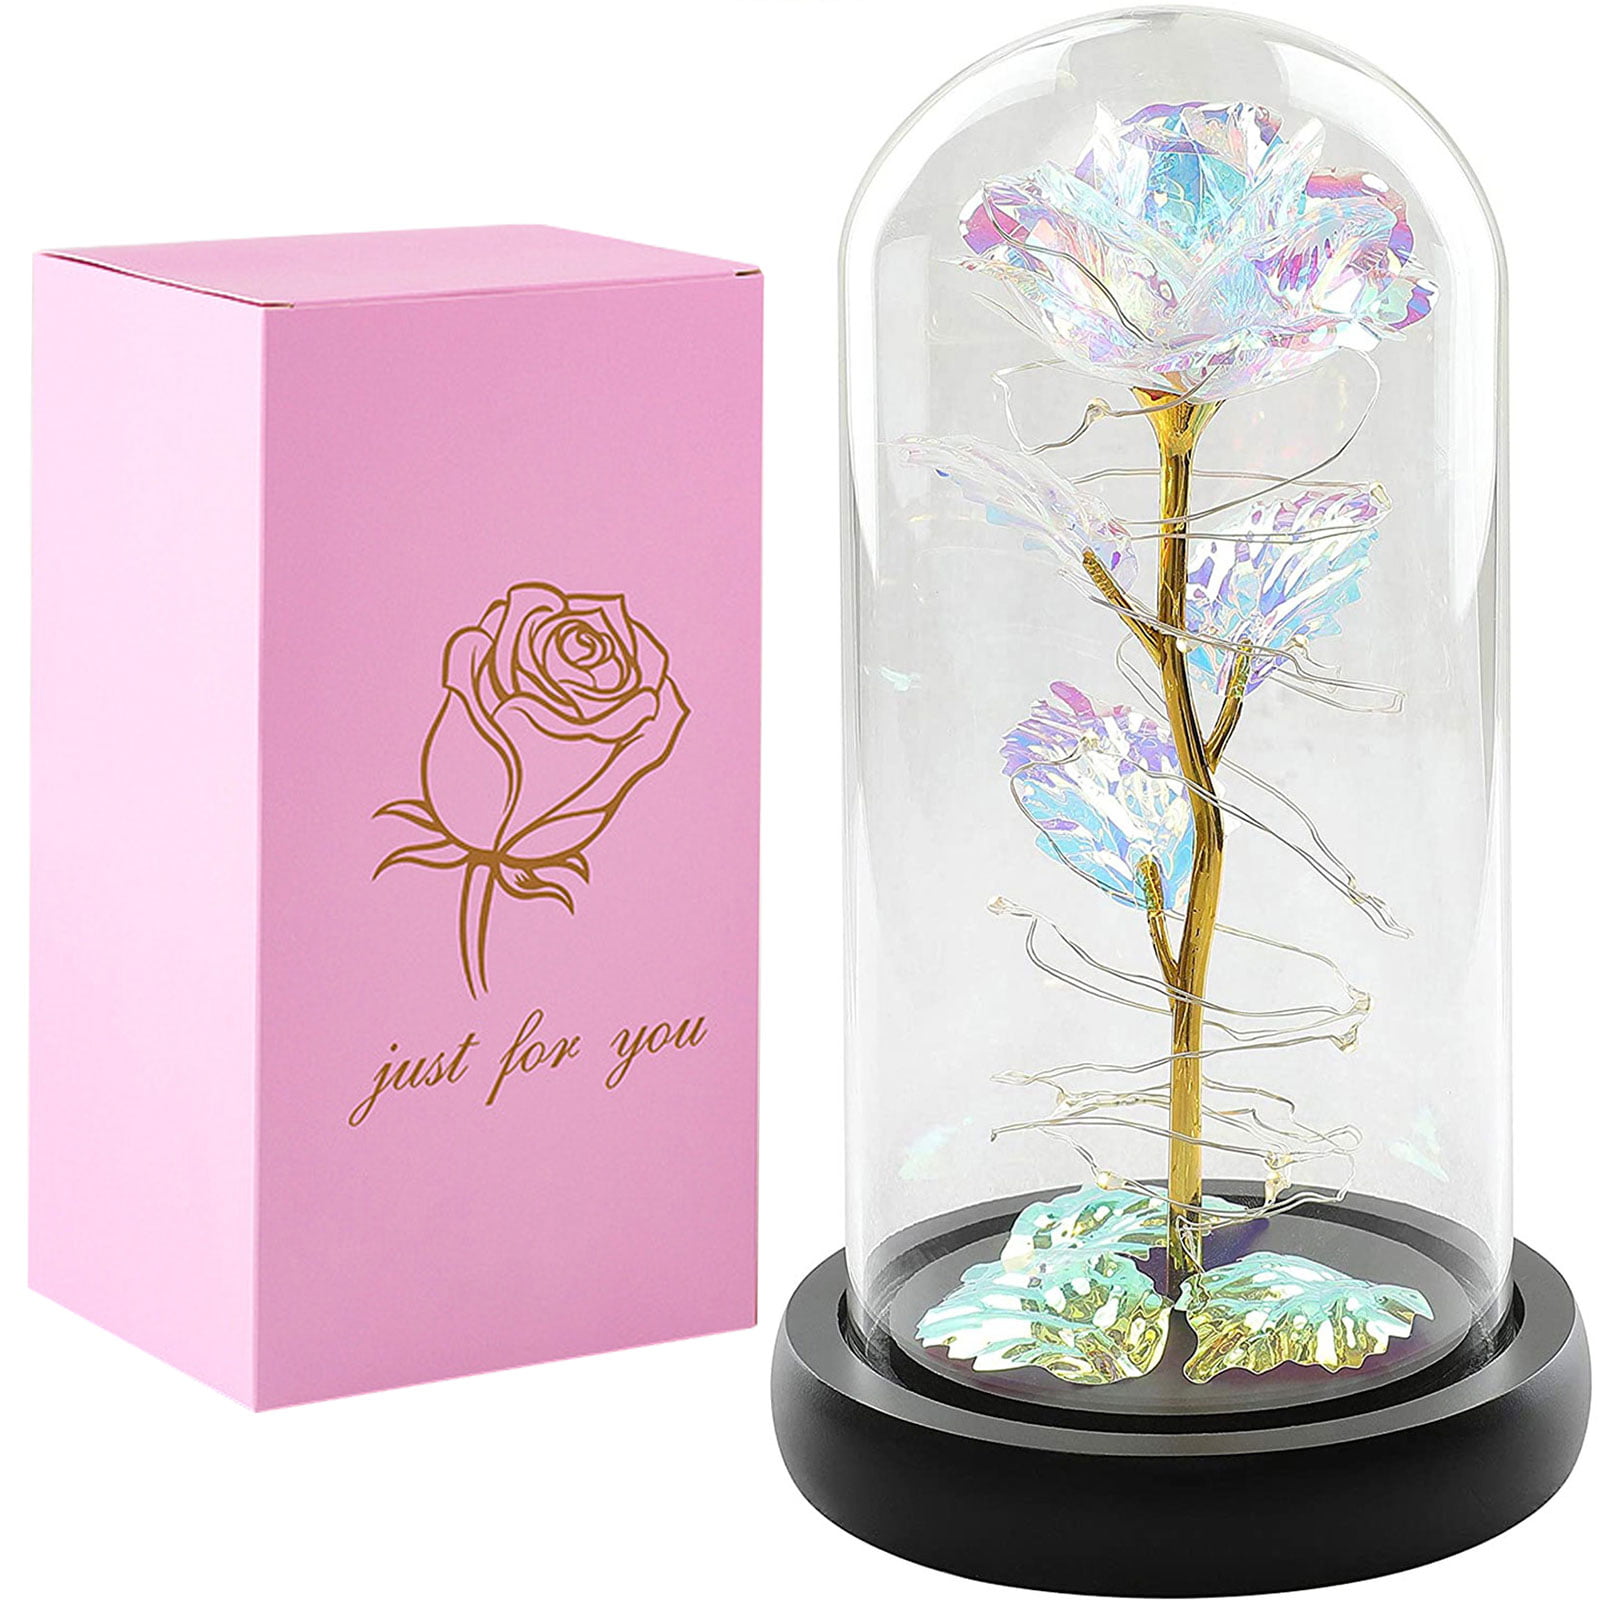 Details about   Rose In Glass Dome Beauty And The Beast Enchanted LED Light Valentine's Day Gift 